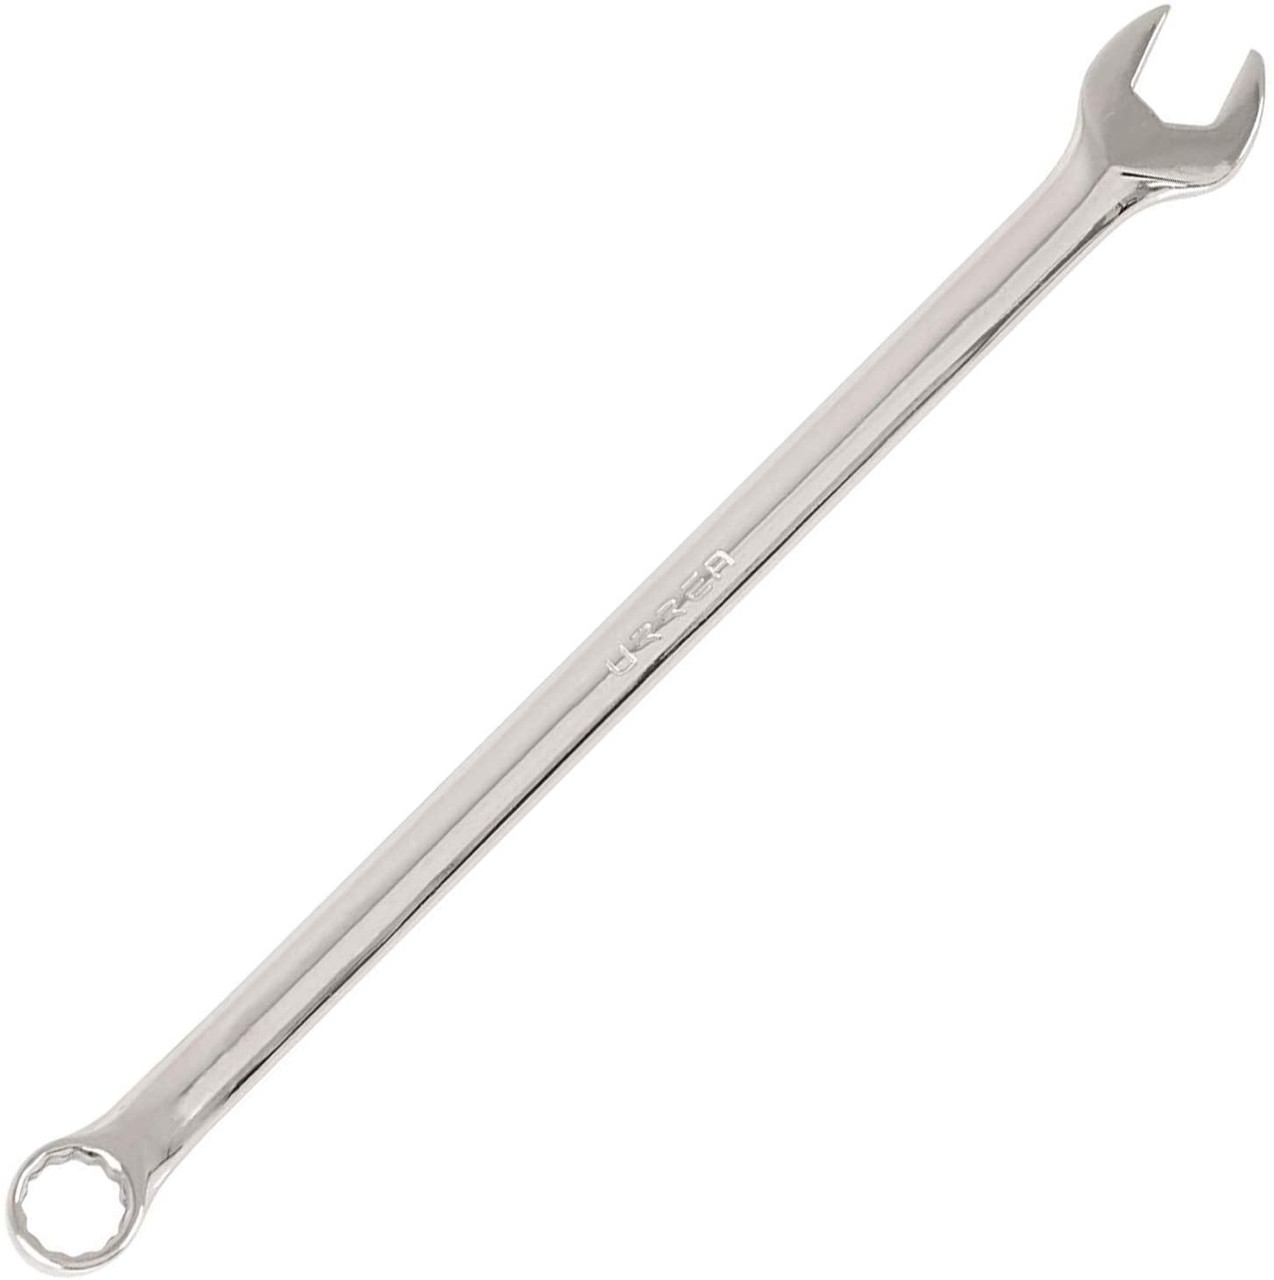 Full polished  Extra Long combination wrench, Size: 20mm, 12 point, Total Length: 14"